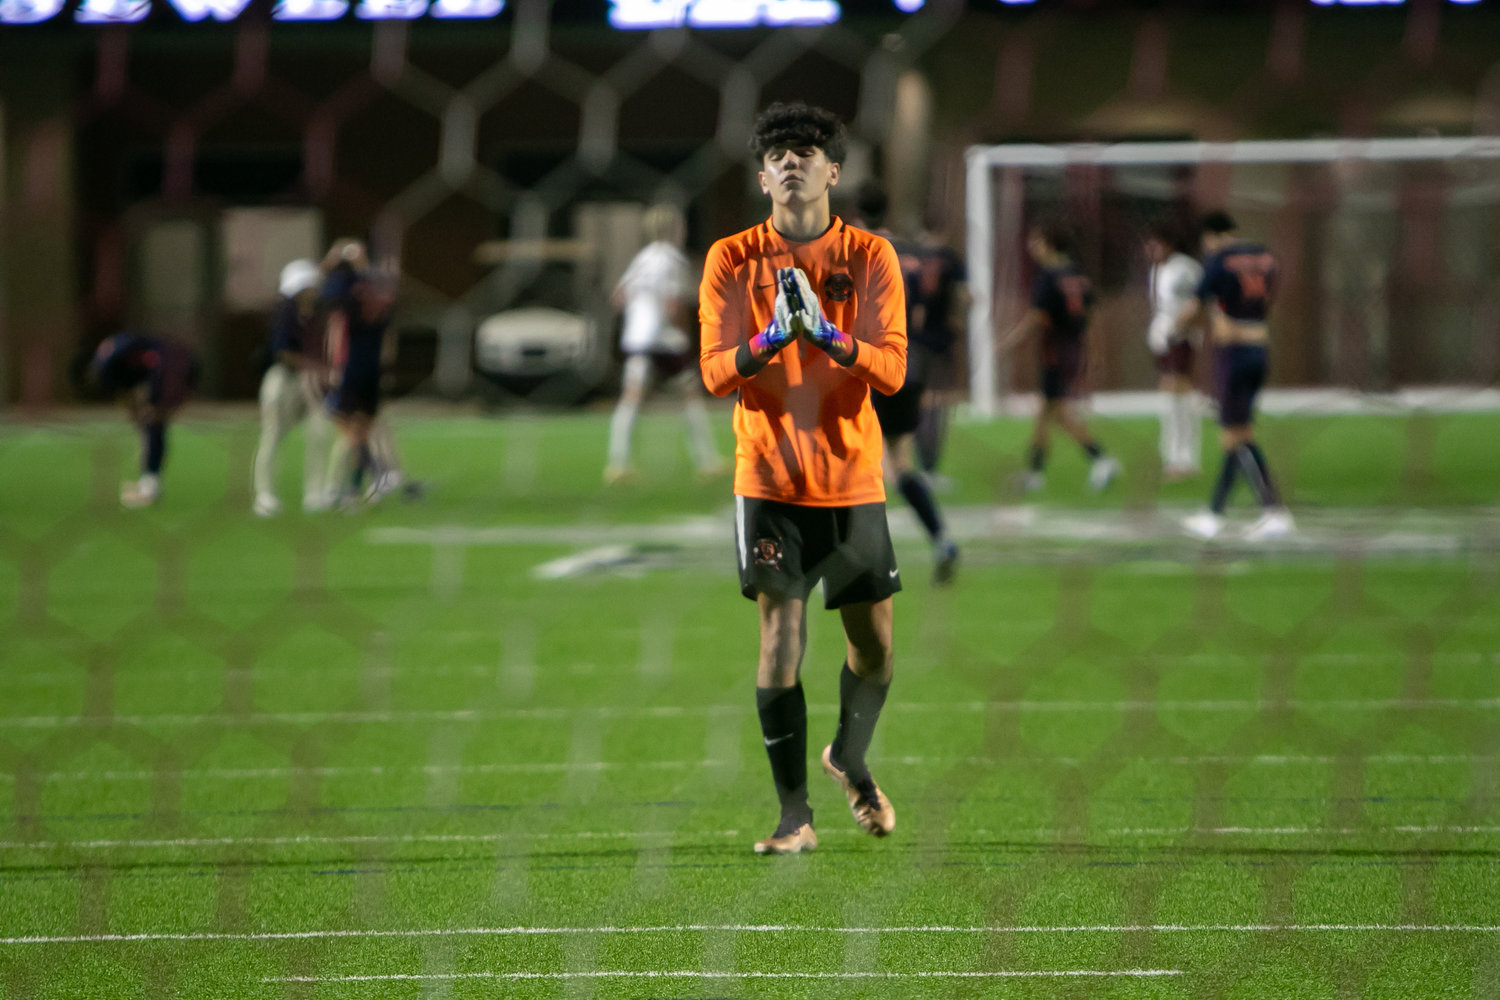 Ben Aviles Vera during Friday's Class 6A Regional Quarterfinal game between Seven Lakes and Cinco Ranch at Legacy Stadium.